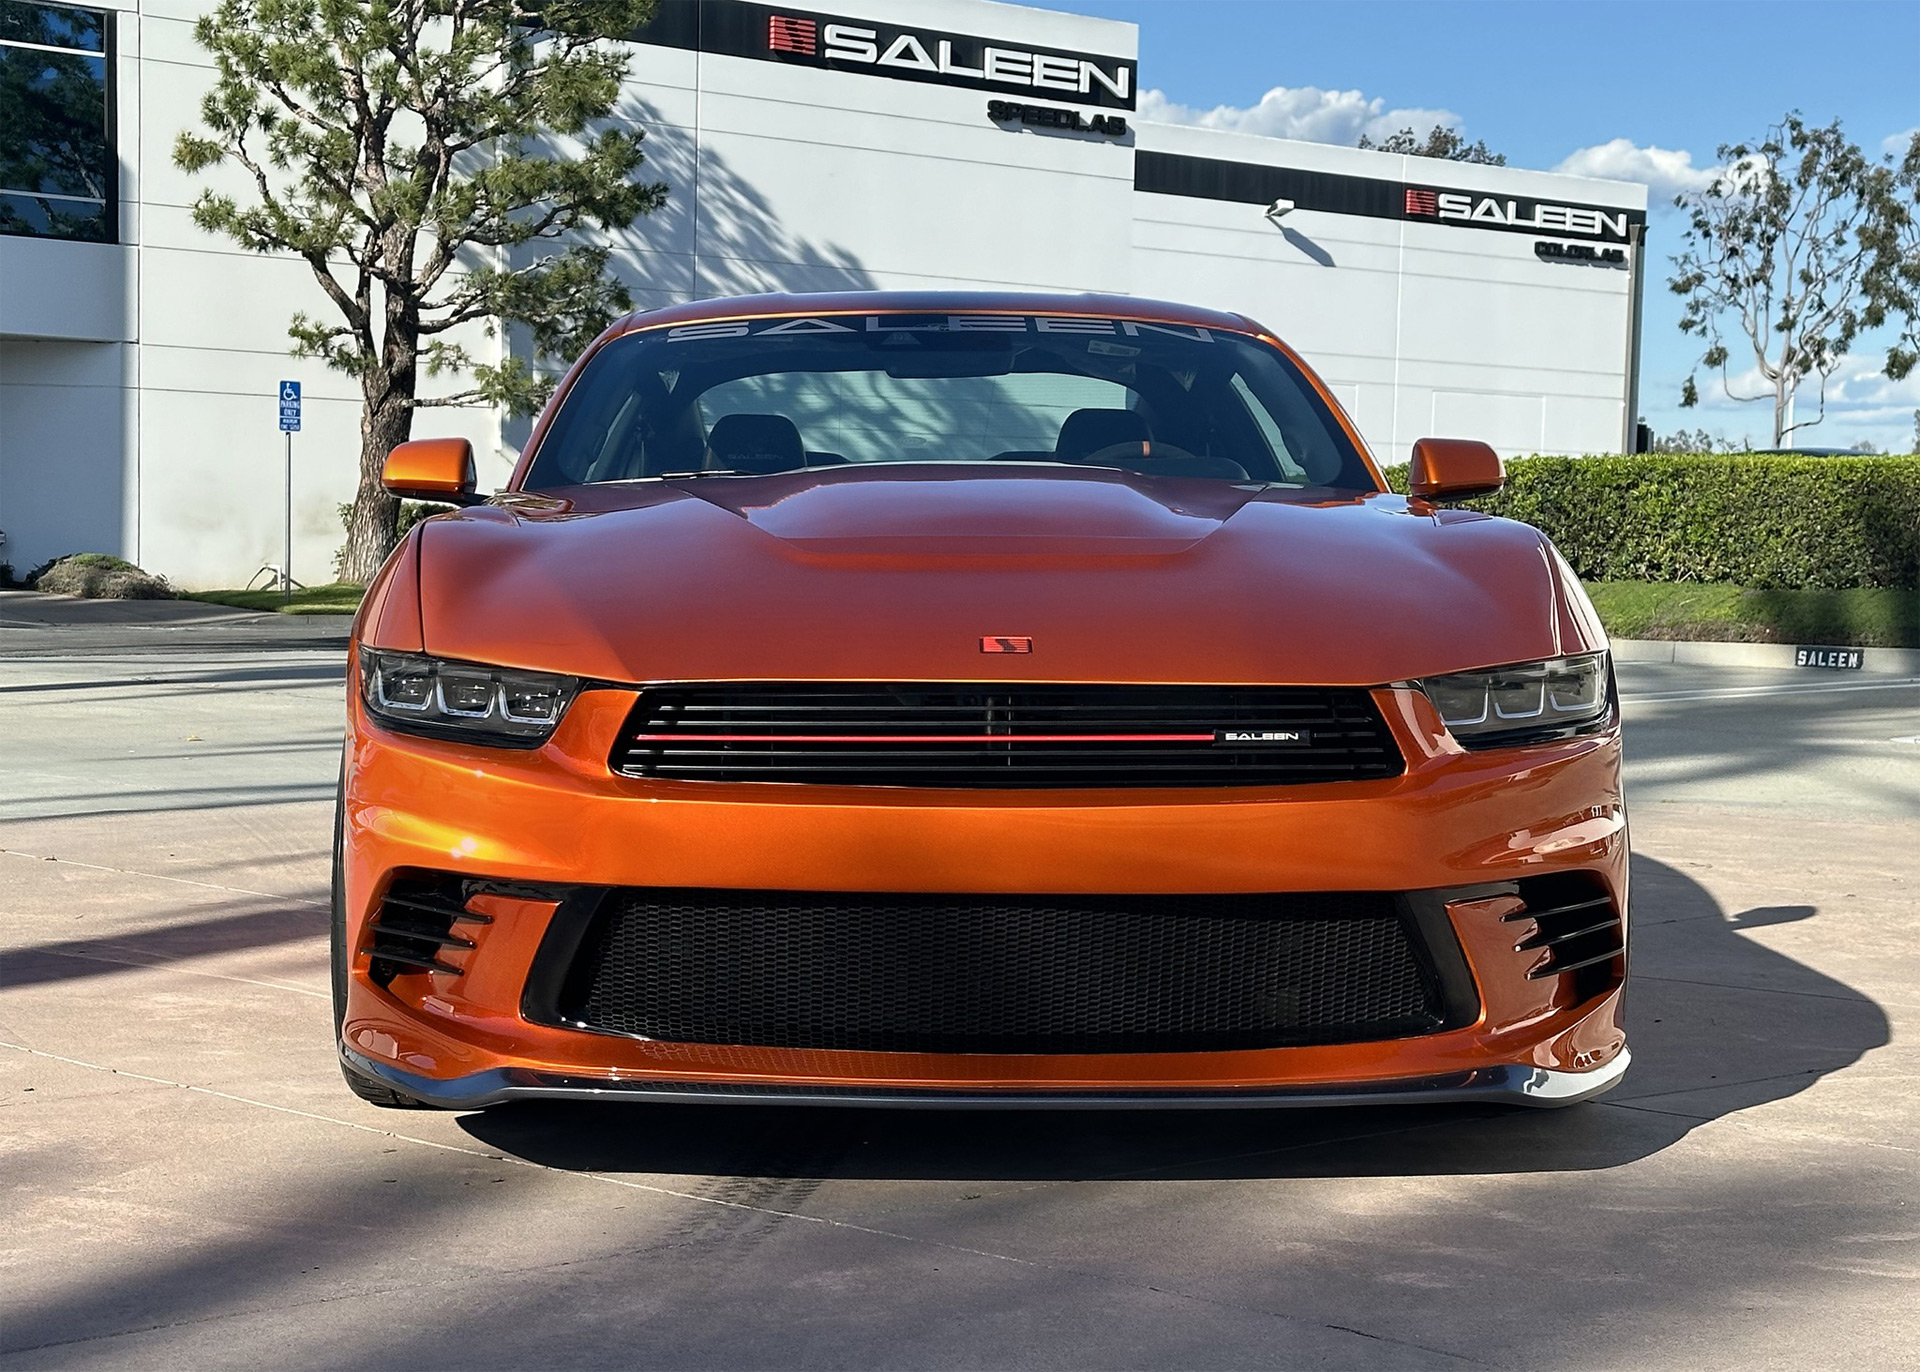 2024 Saleen 302 Mustang, 2024 Mercedes CLE-Class: This Week’s Top Photo Auto Recent